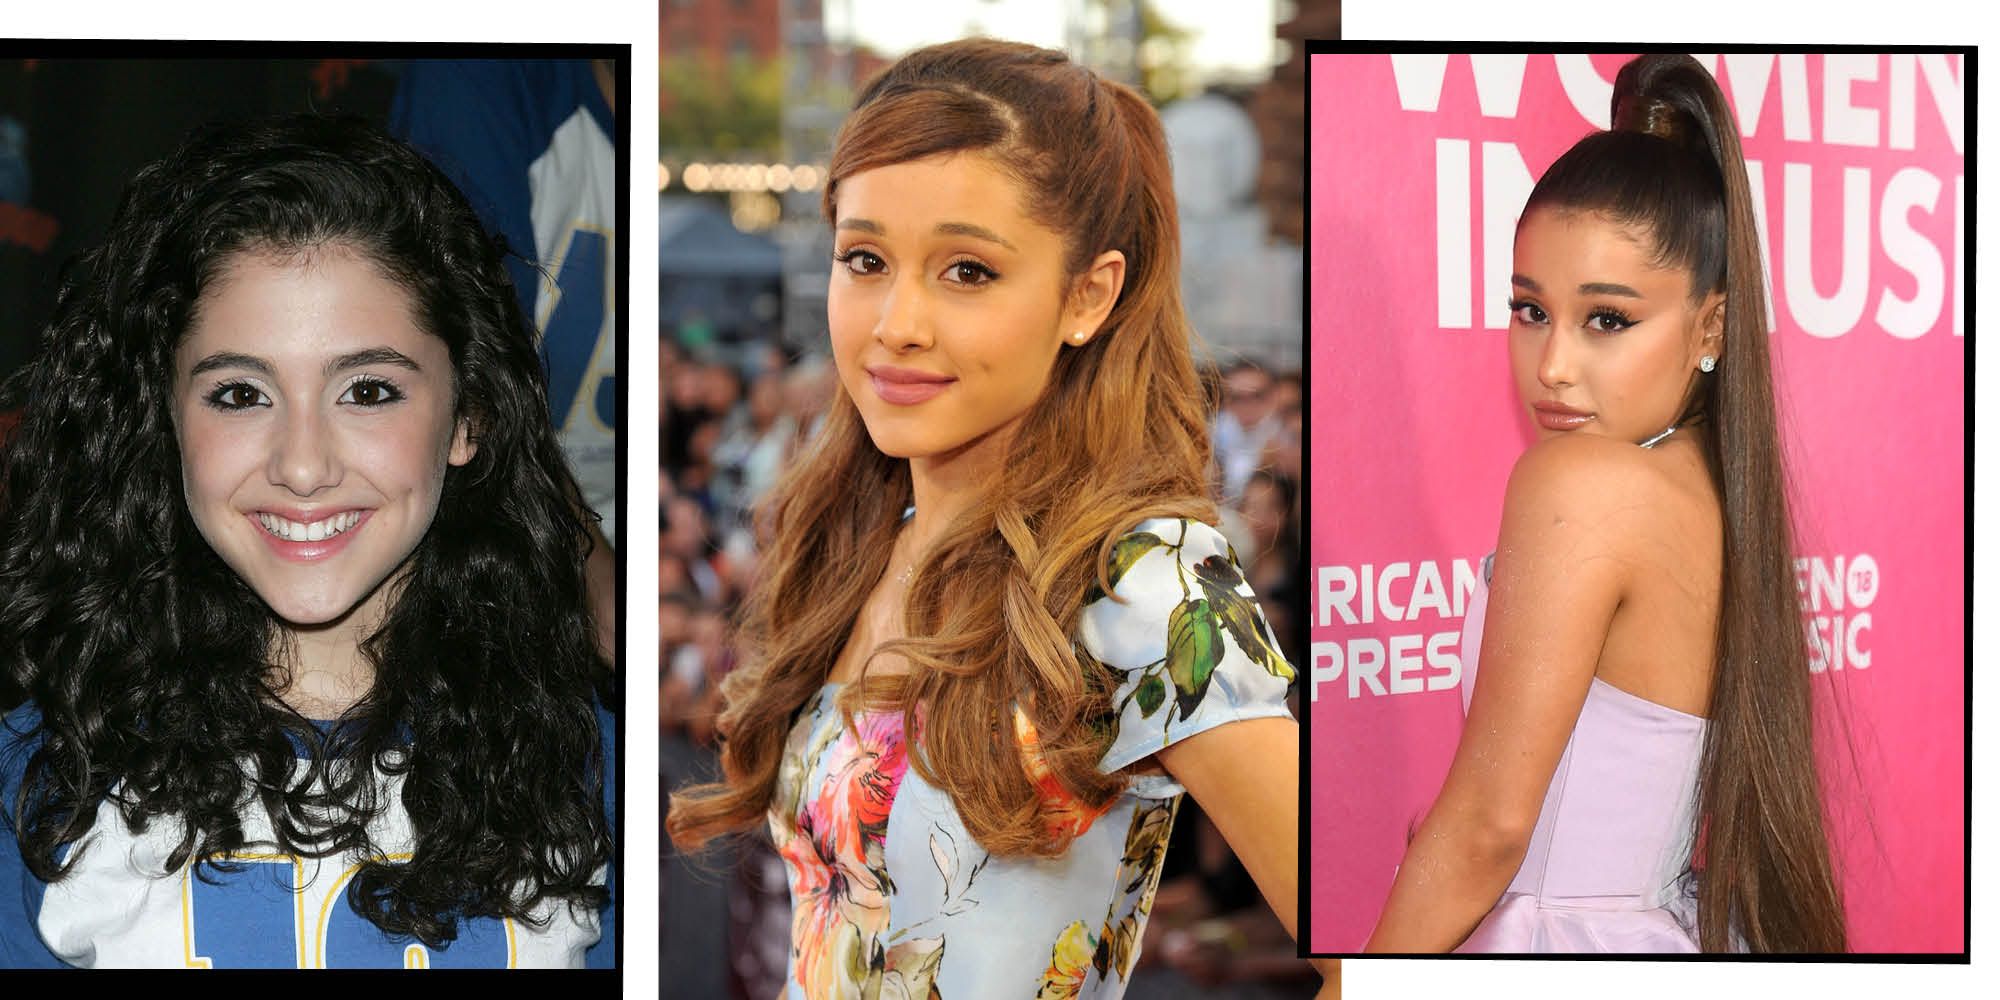 Ariana Grande Pictures Through the Years